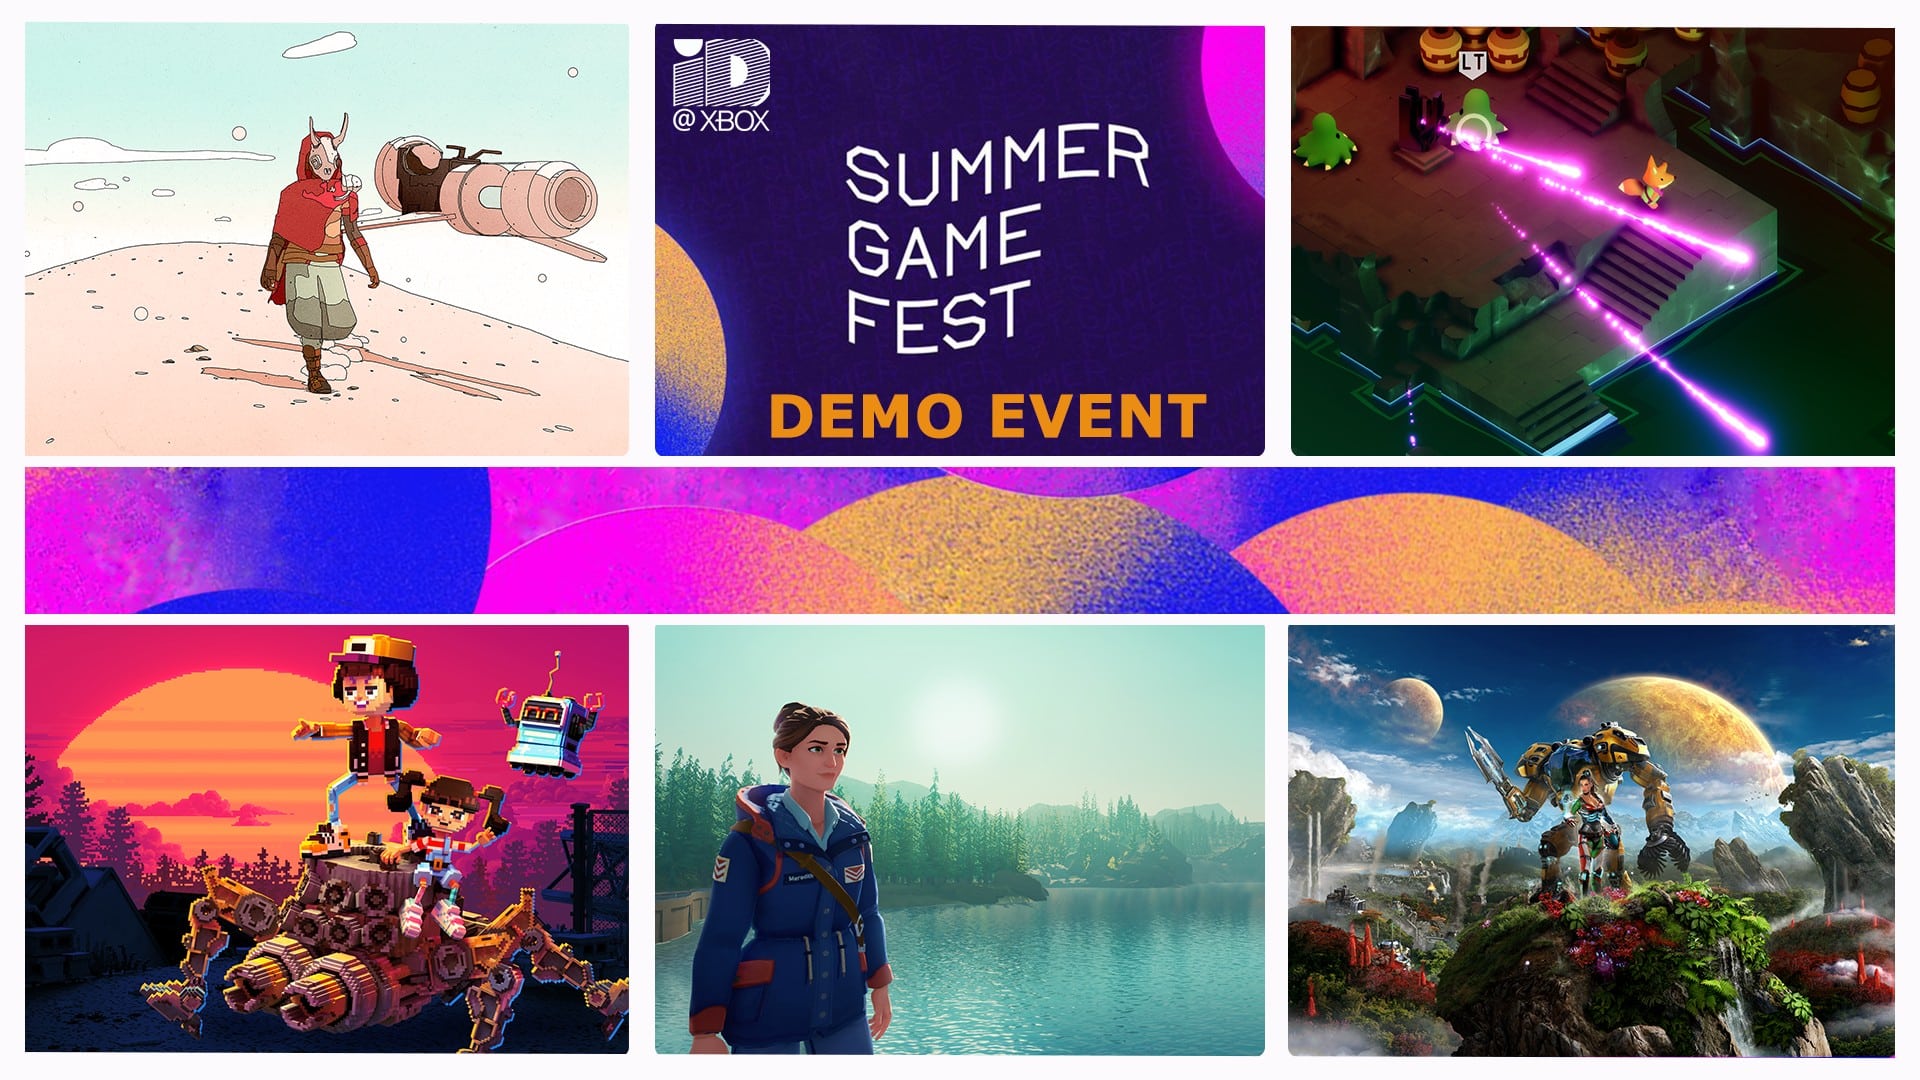 Xbox Summer Game Fest 2021 Demo Event